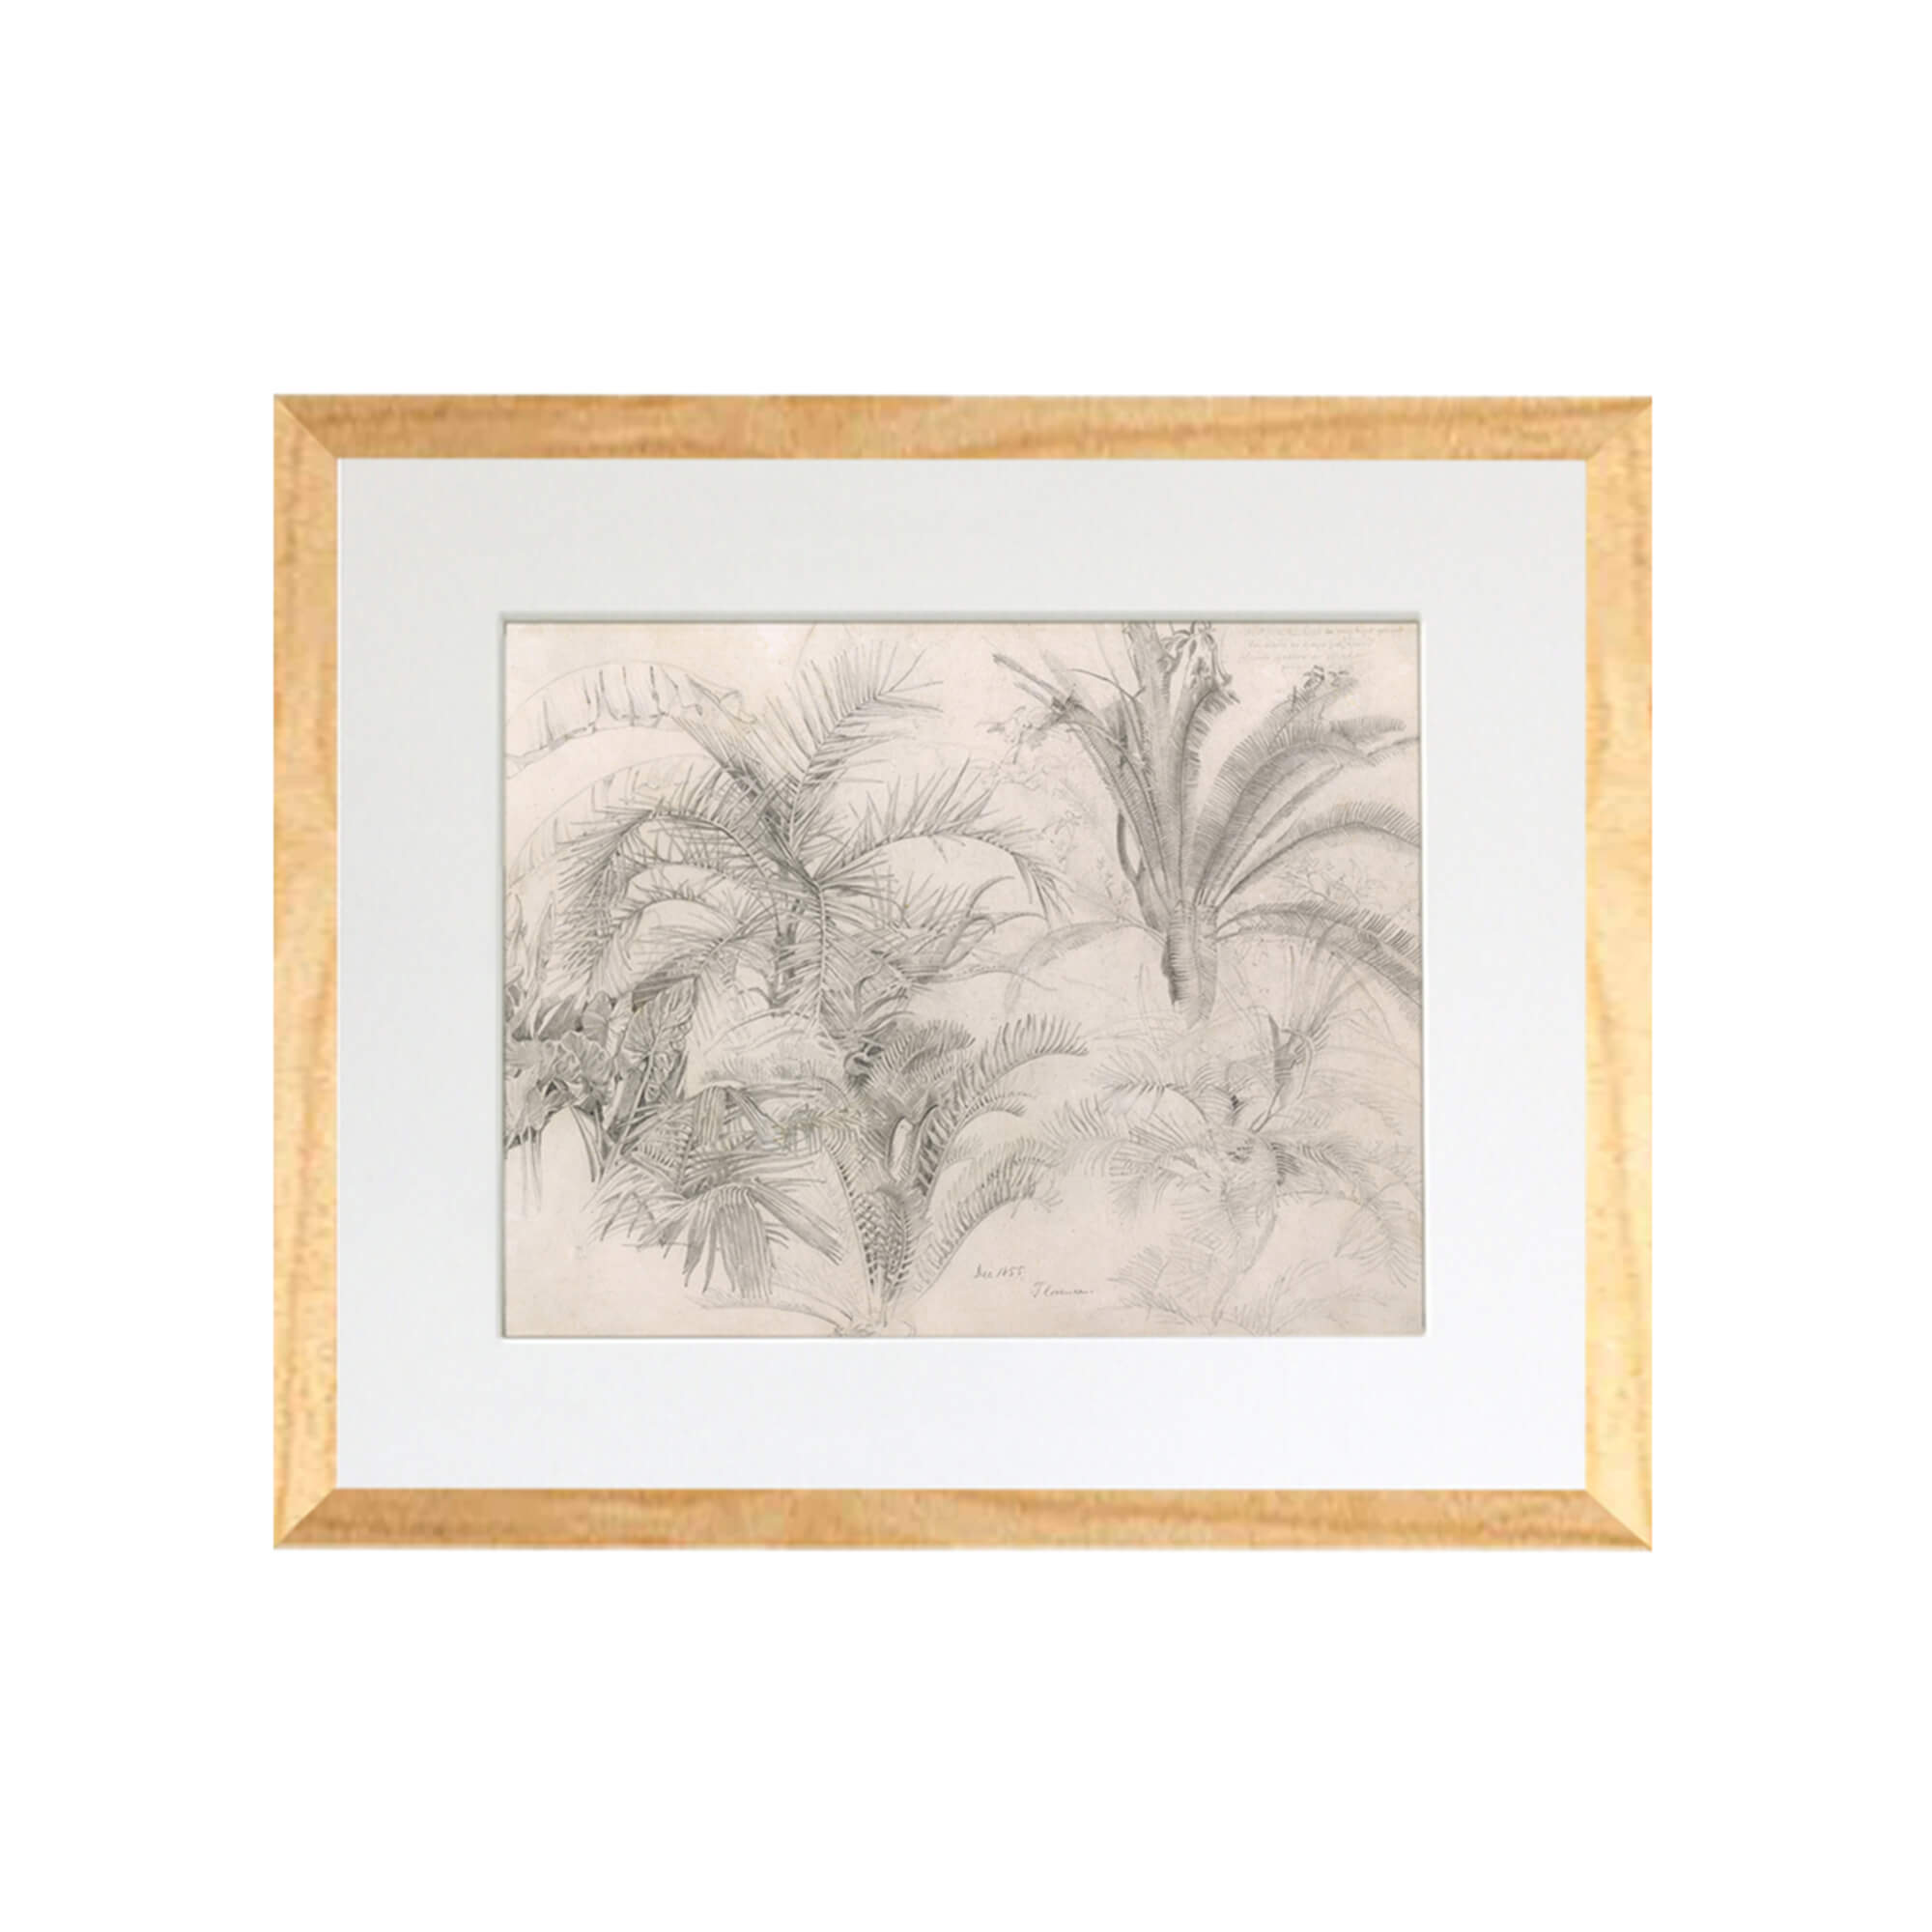 A sketch of palm leaves